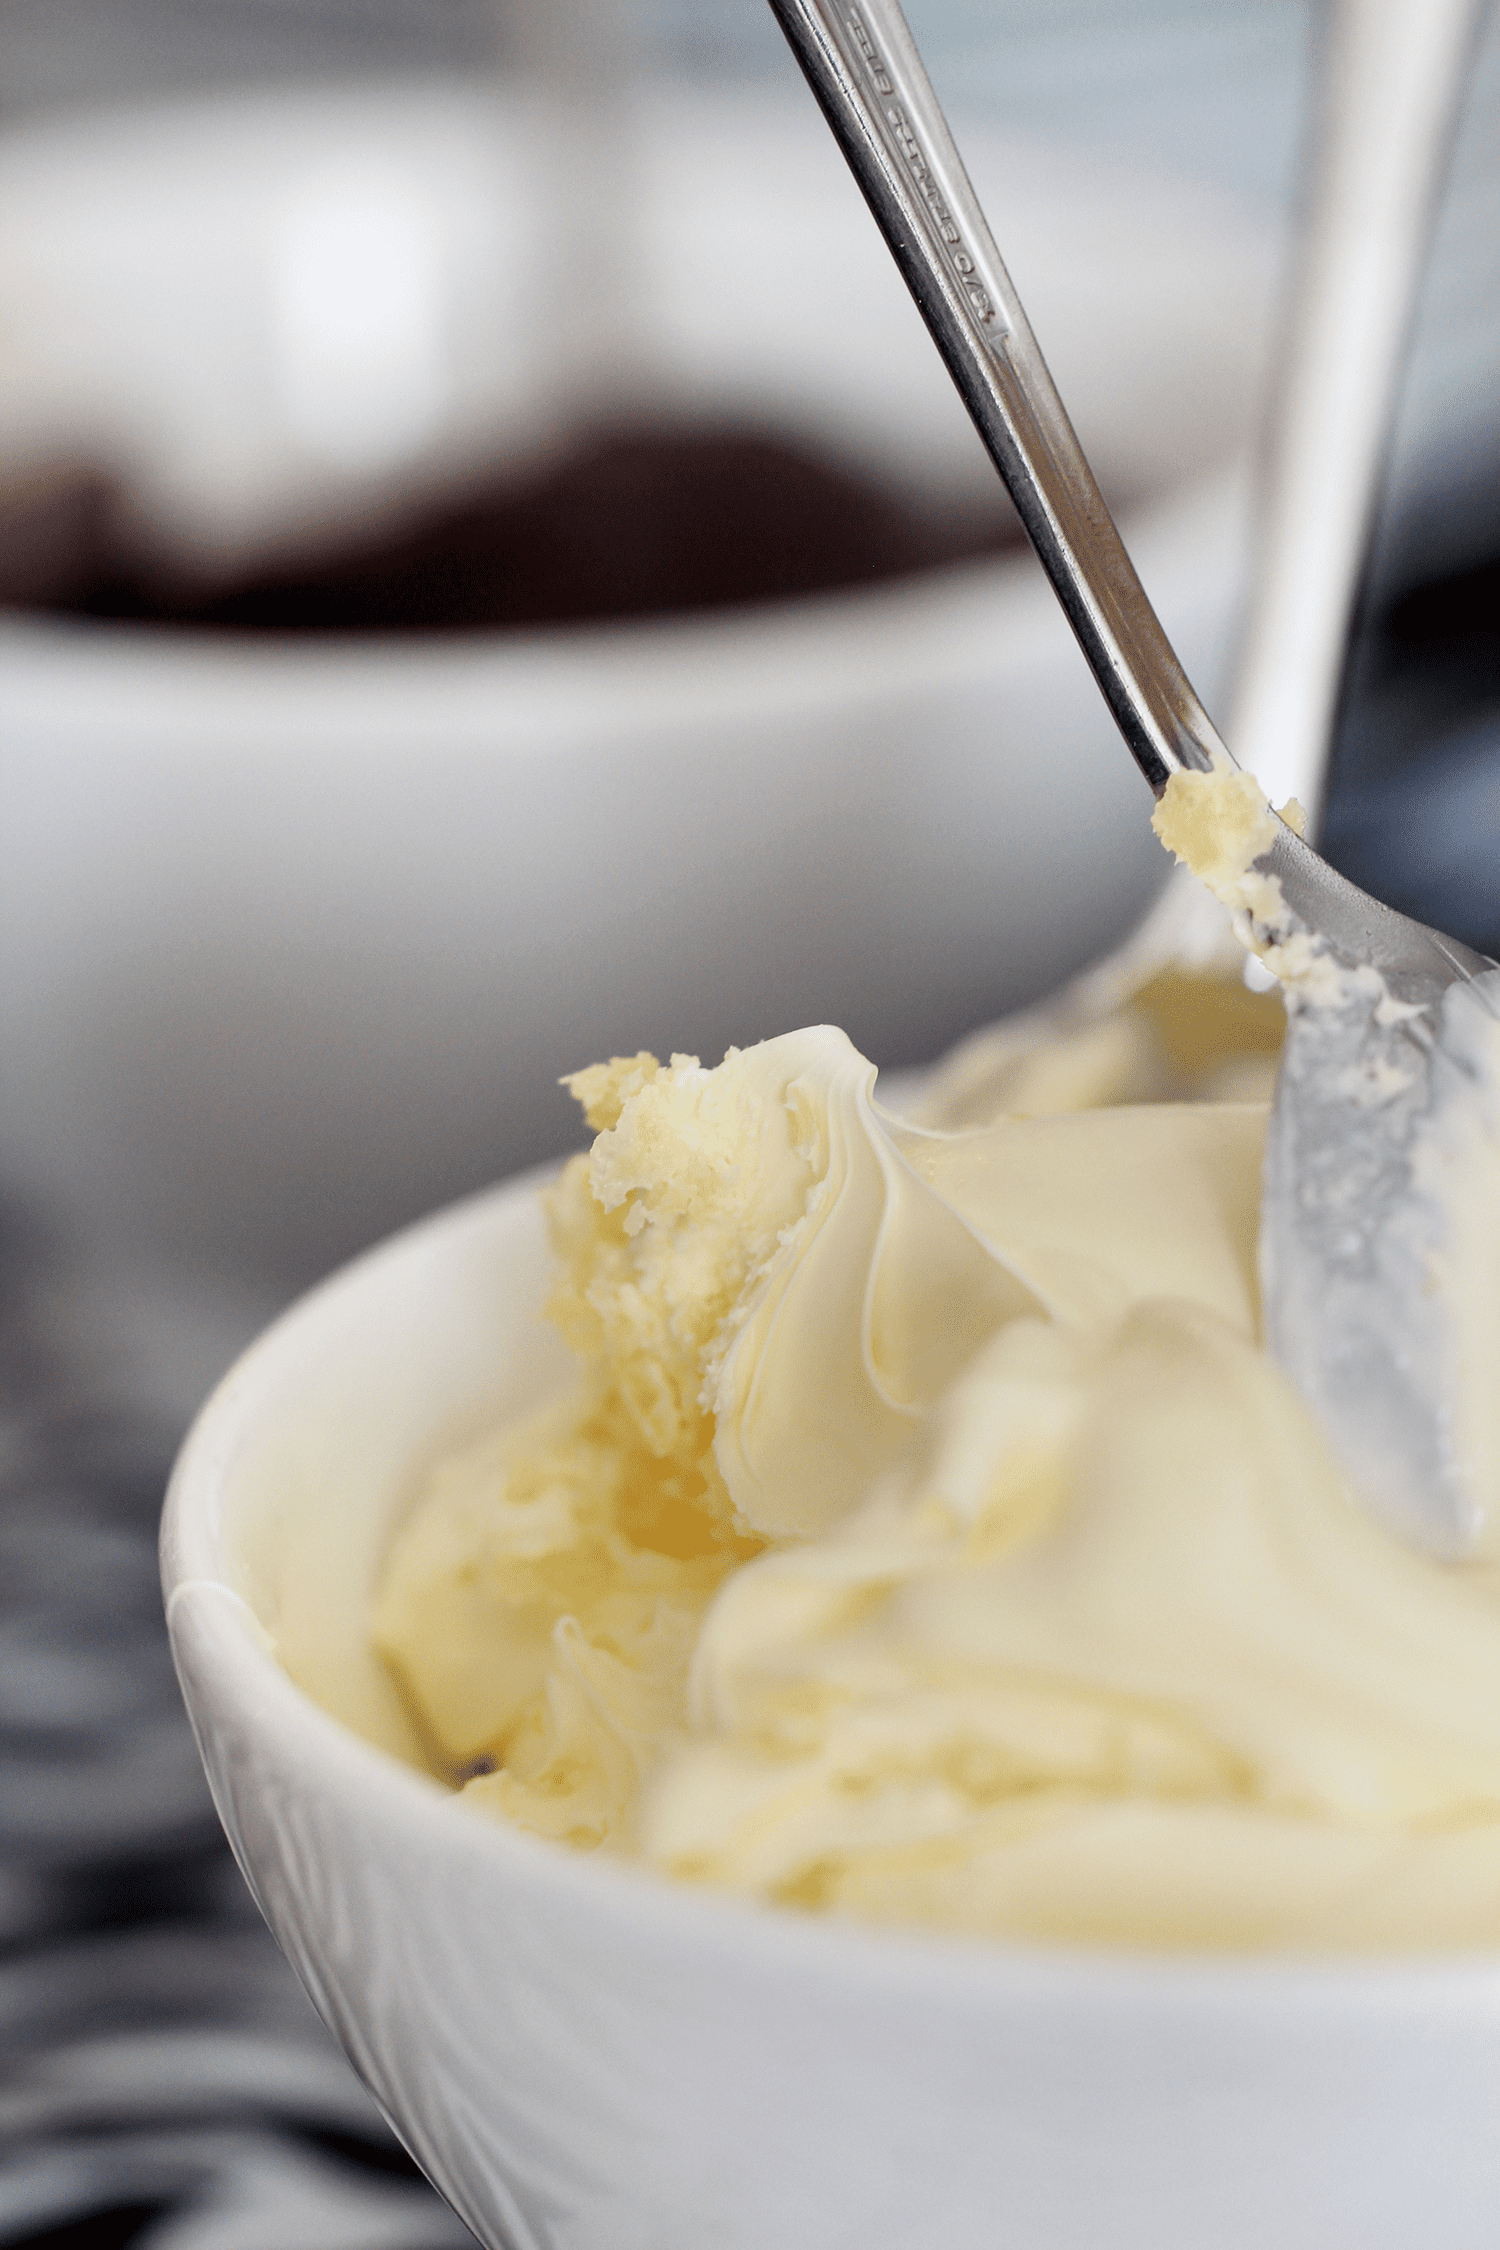 How to Make Clotted Cream at Home | Cooking Clue